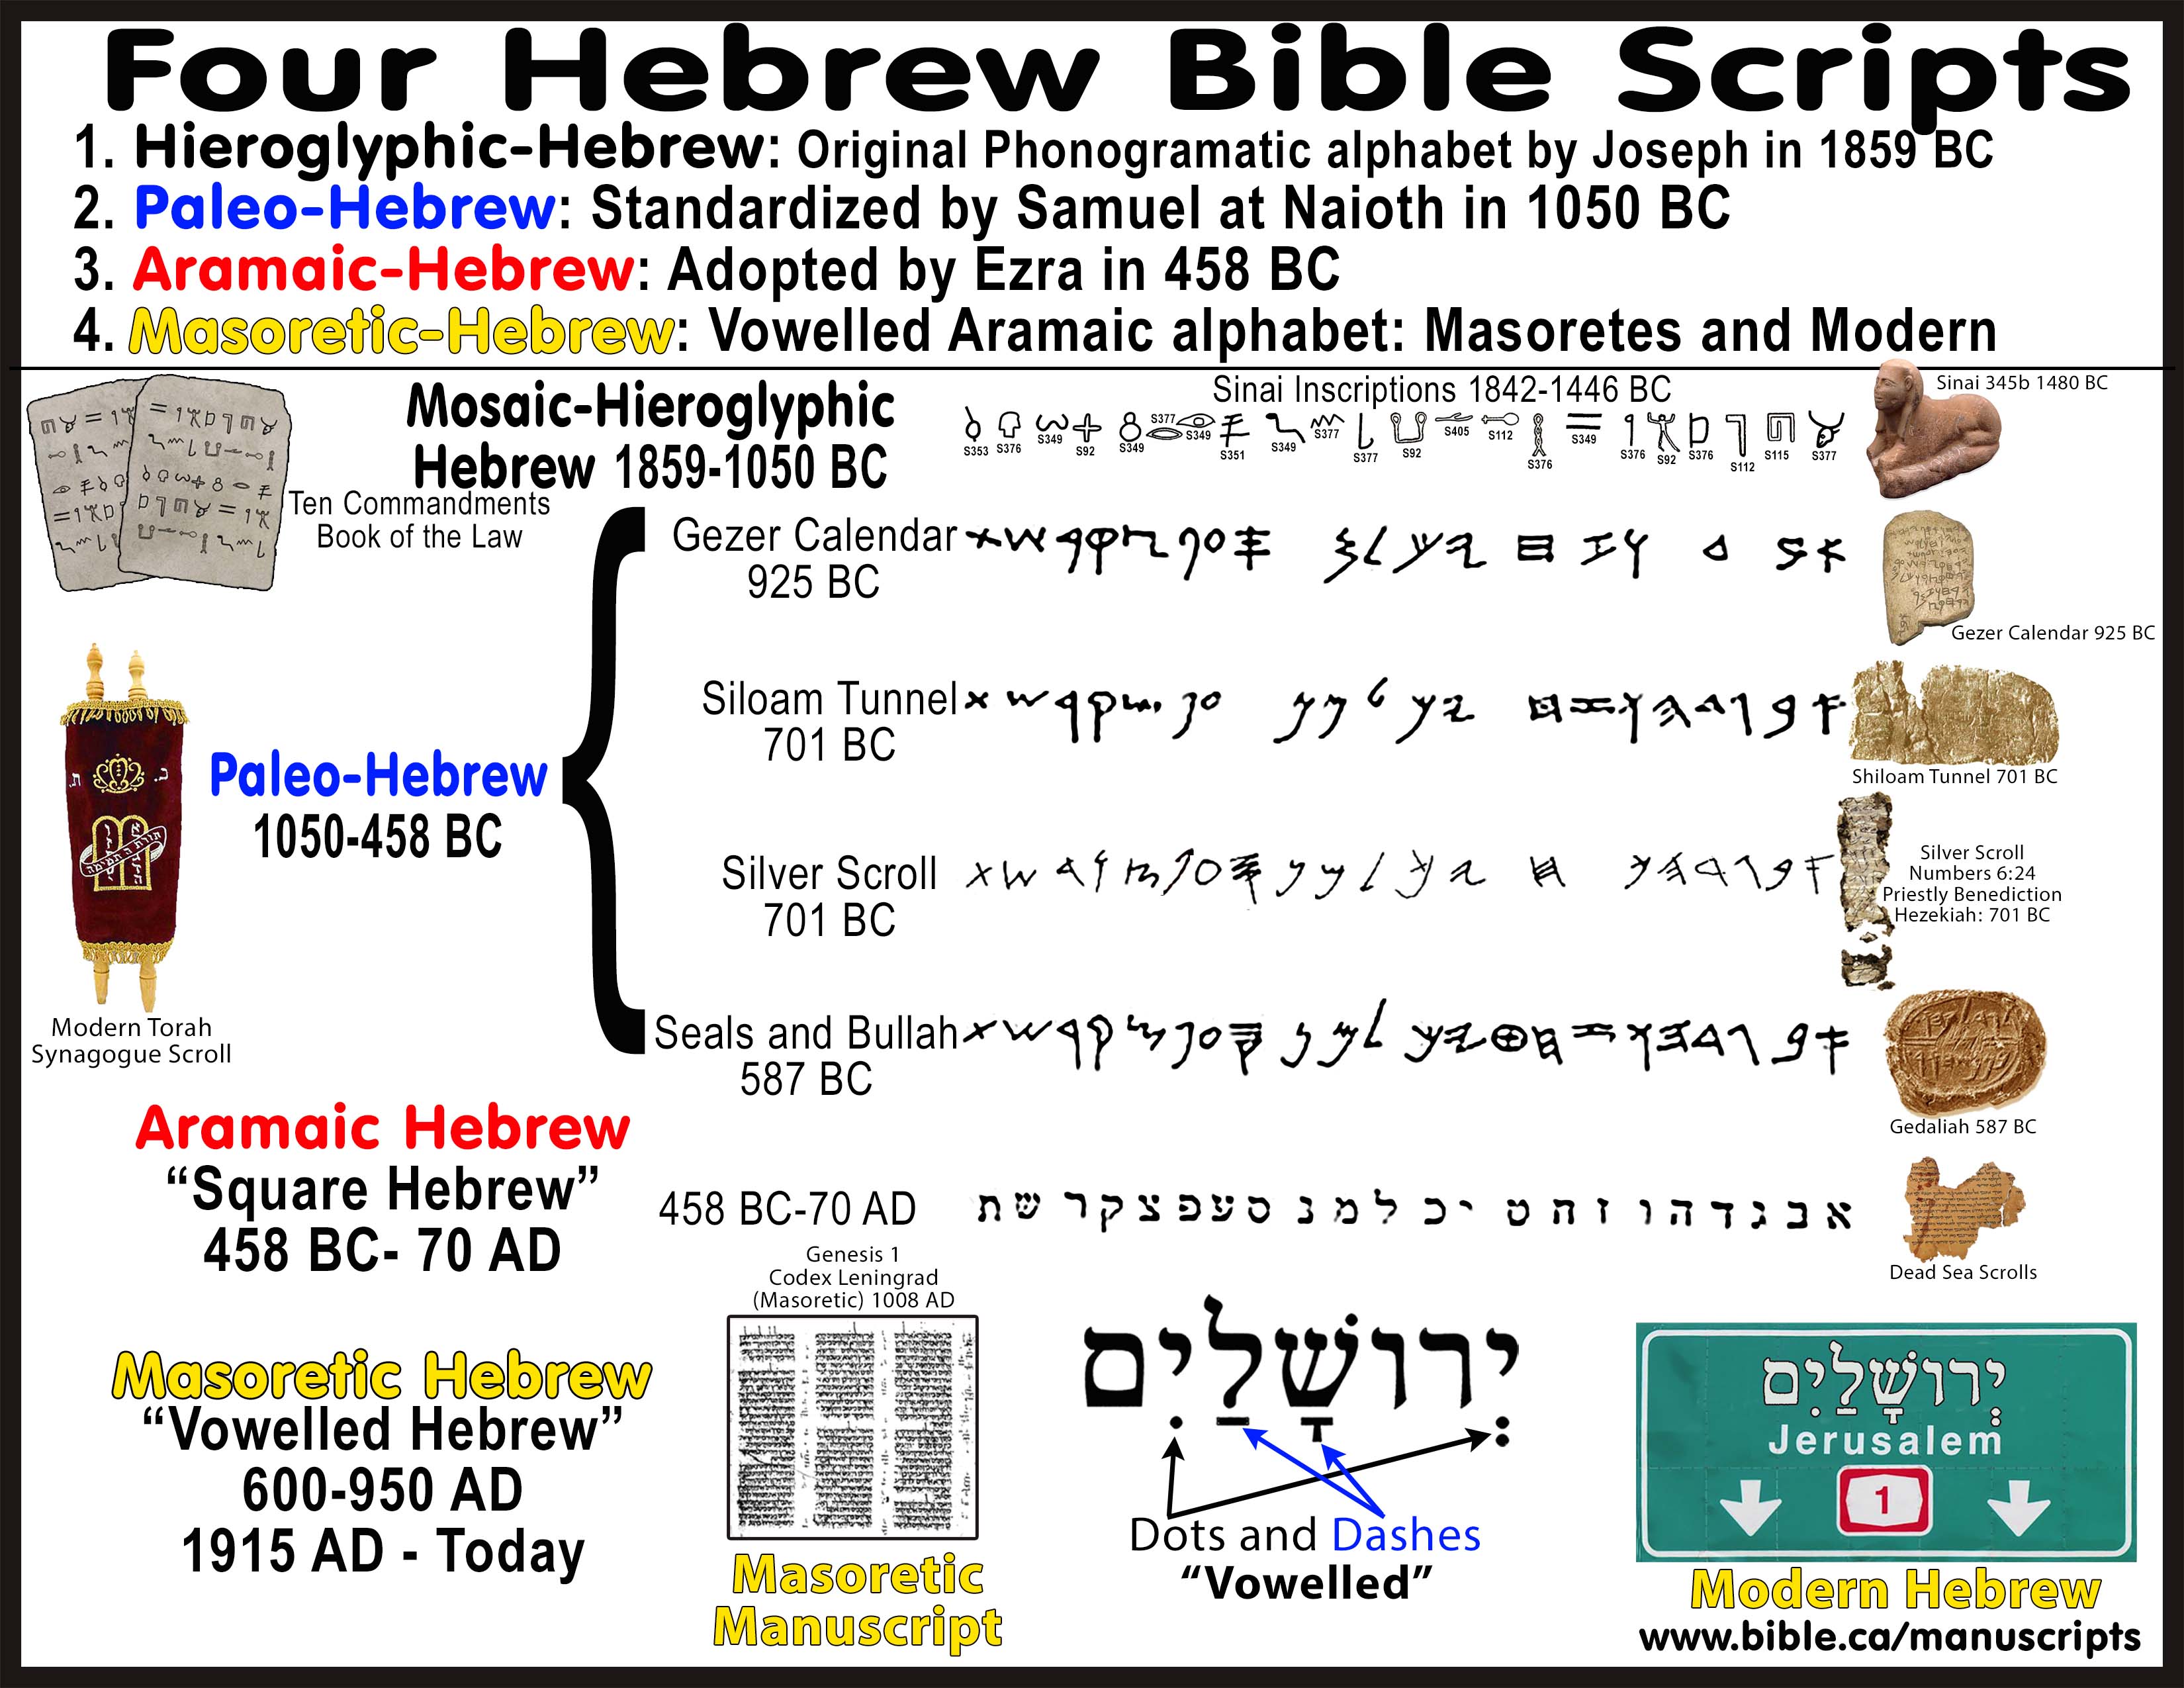 Interactive Bible Old Testament image by 4BibleStudy Septuagint